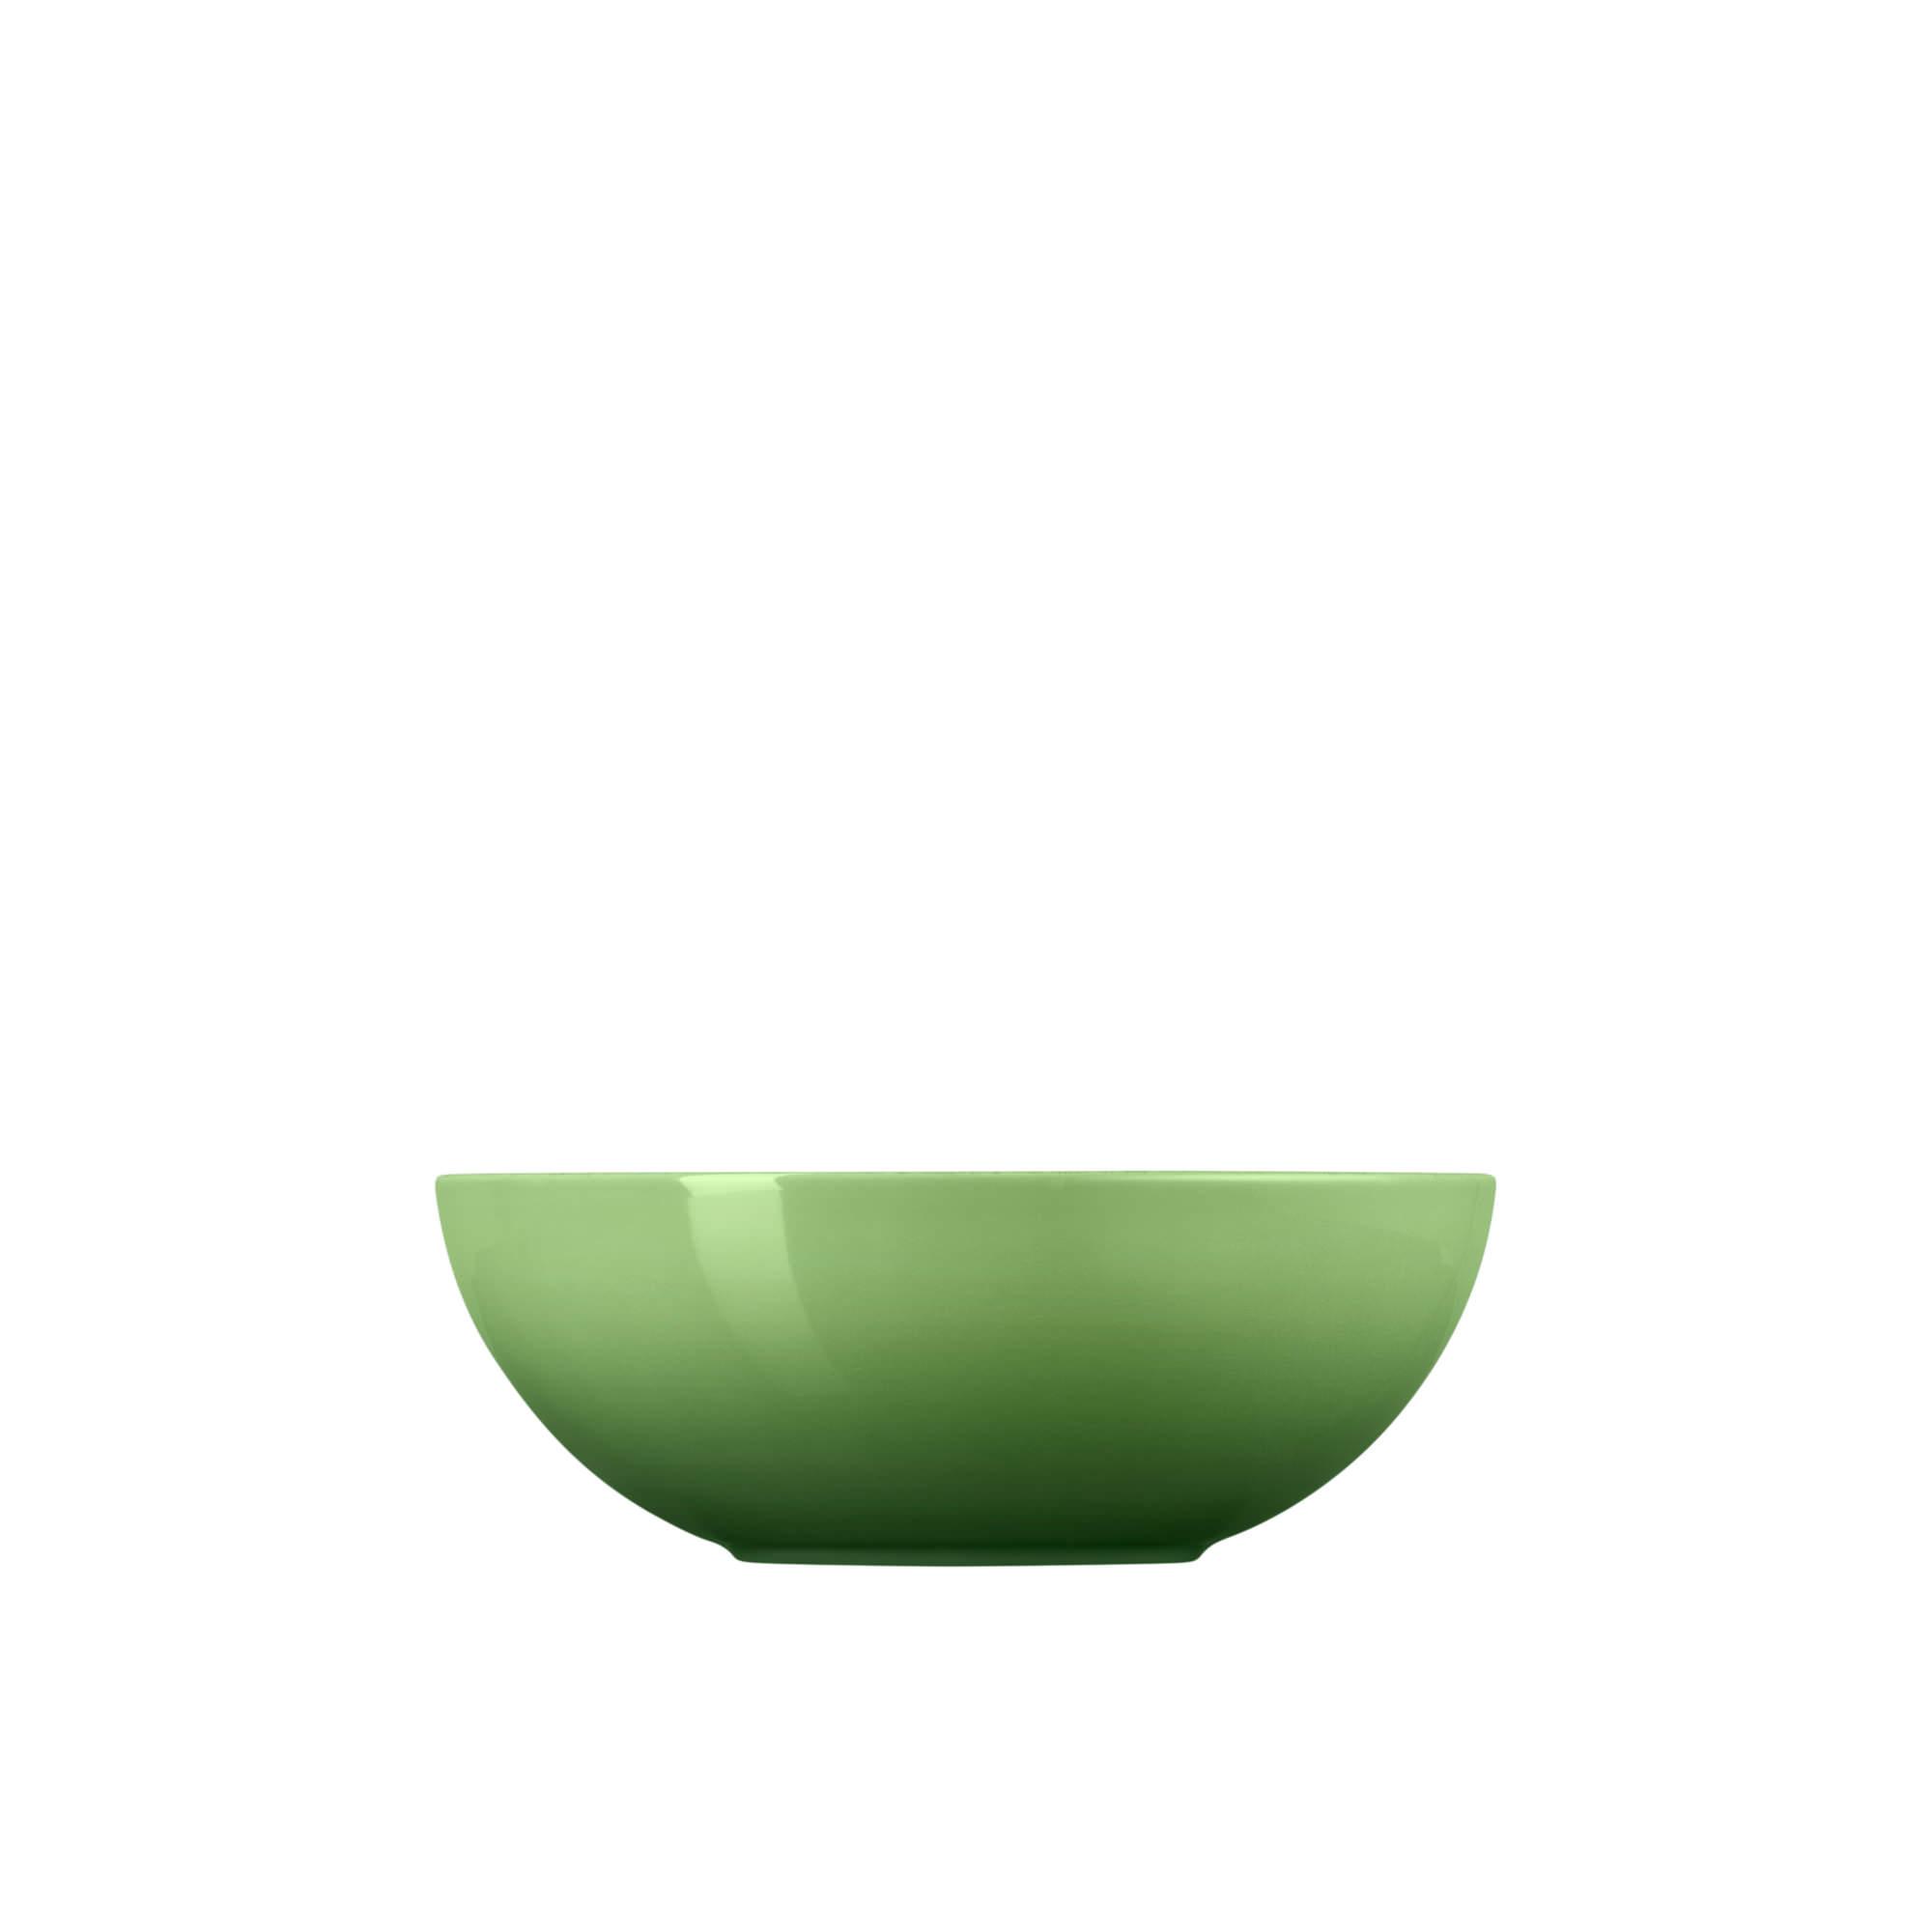 Le Creuset Stoneware Cereal Bowl Set of 4 Bamboo Green Image 5